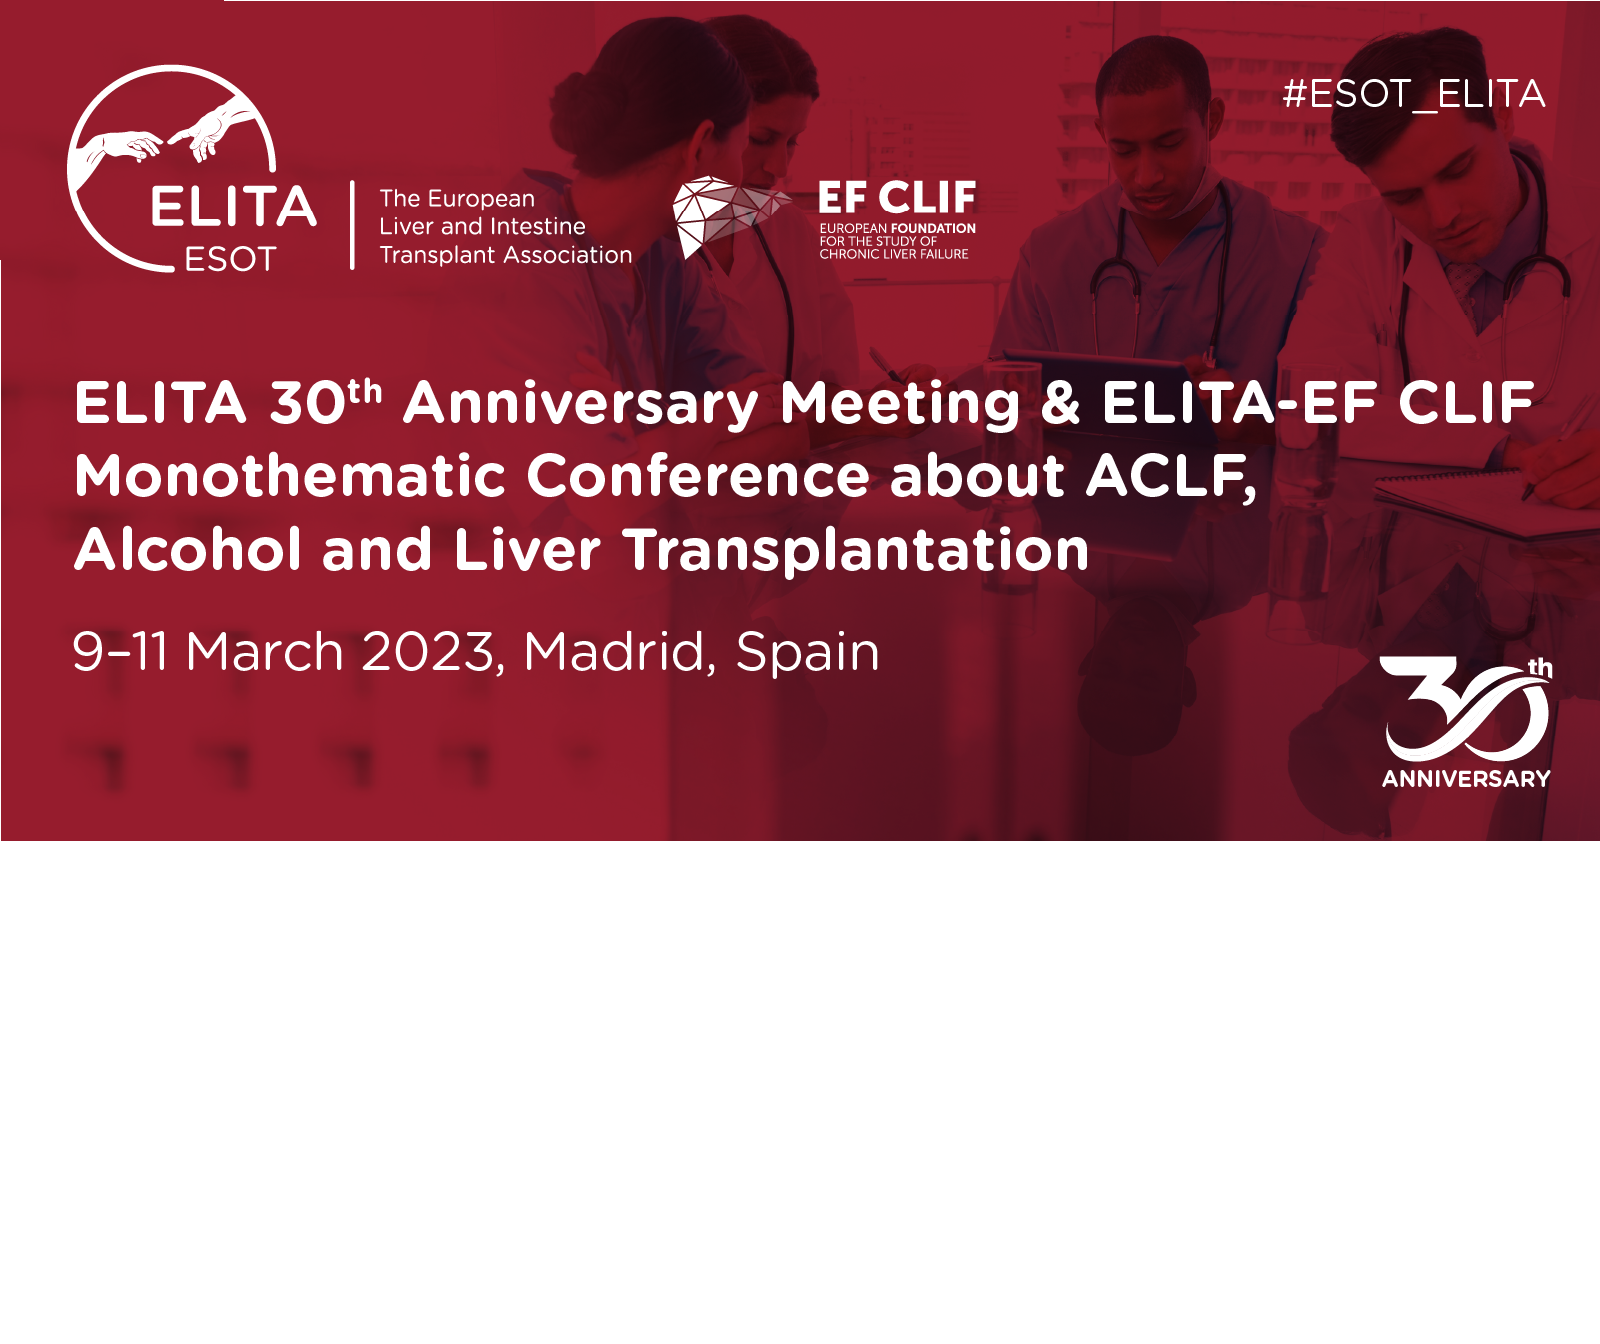 ELITA 30th Anniversary Meeting & ELITA - EF CLIF Monothematic Conference about ACLF, Alcohol and Liver Transplantation